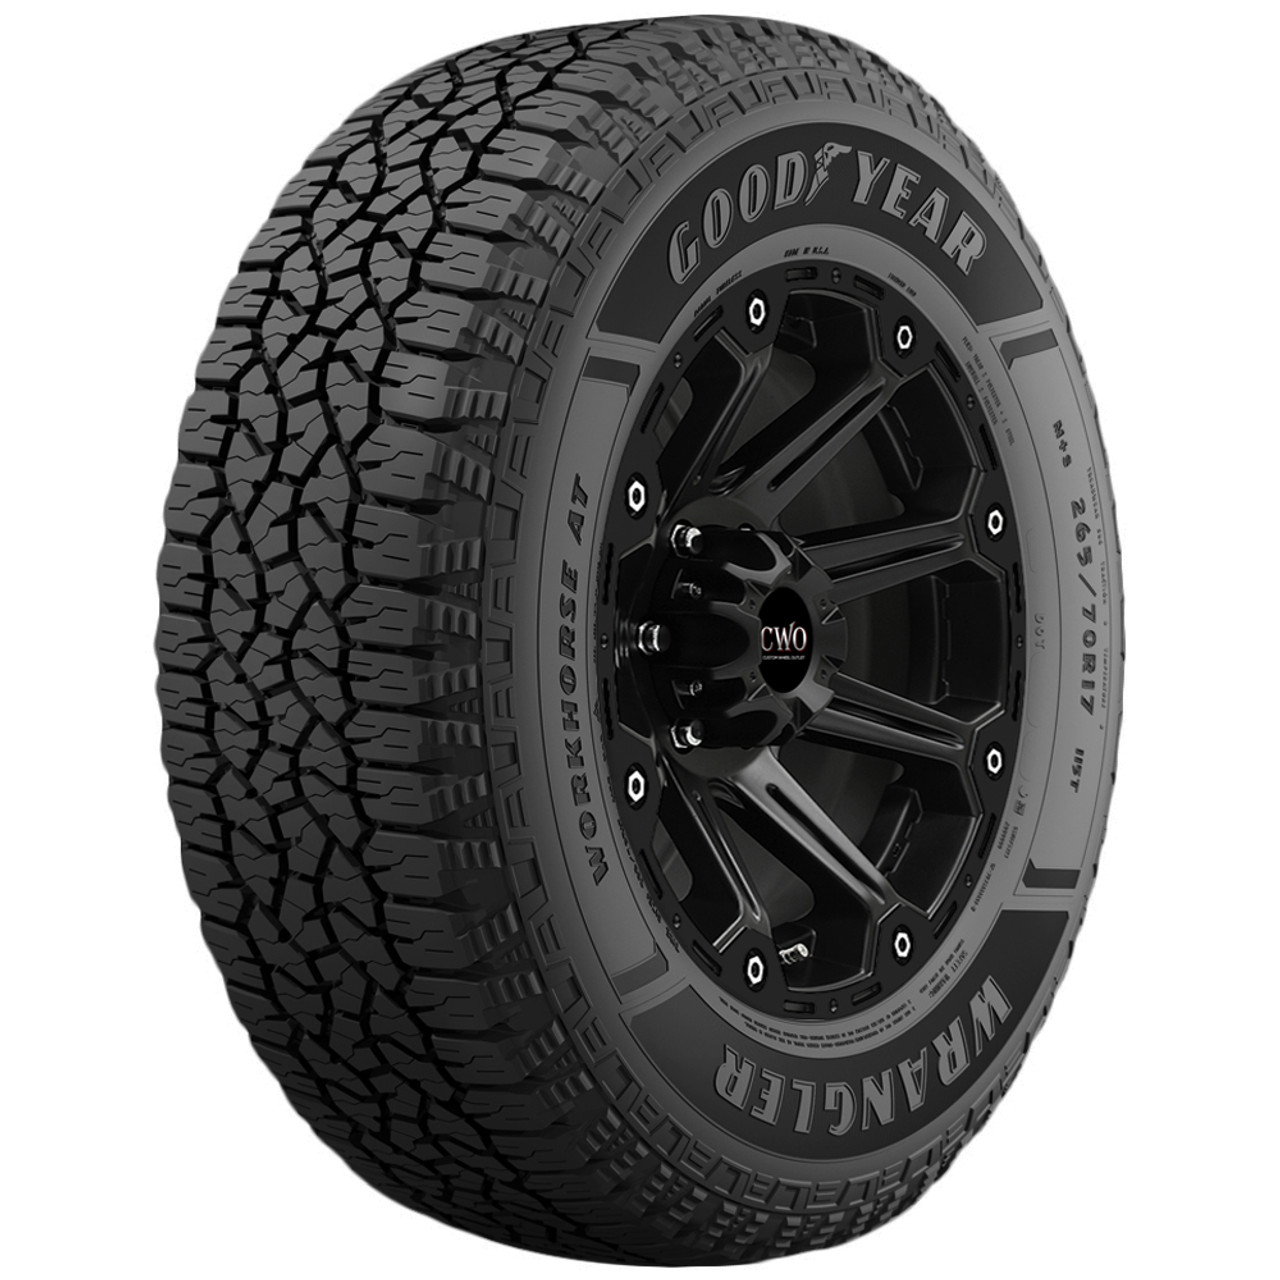 265/60R18 Goodyear Wrangler Workhorse AT 110T SL/4 Ply White Letter Tire  480076856 - ShopCWO